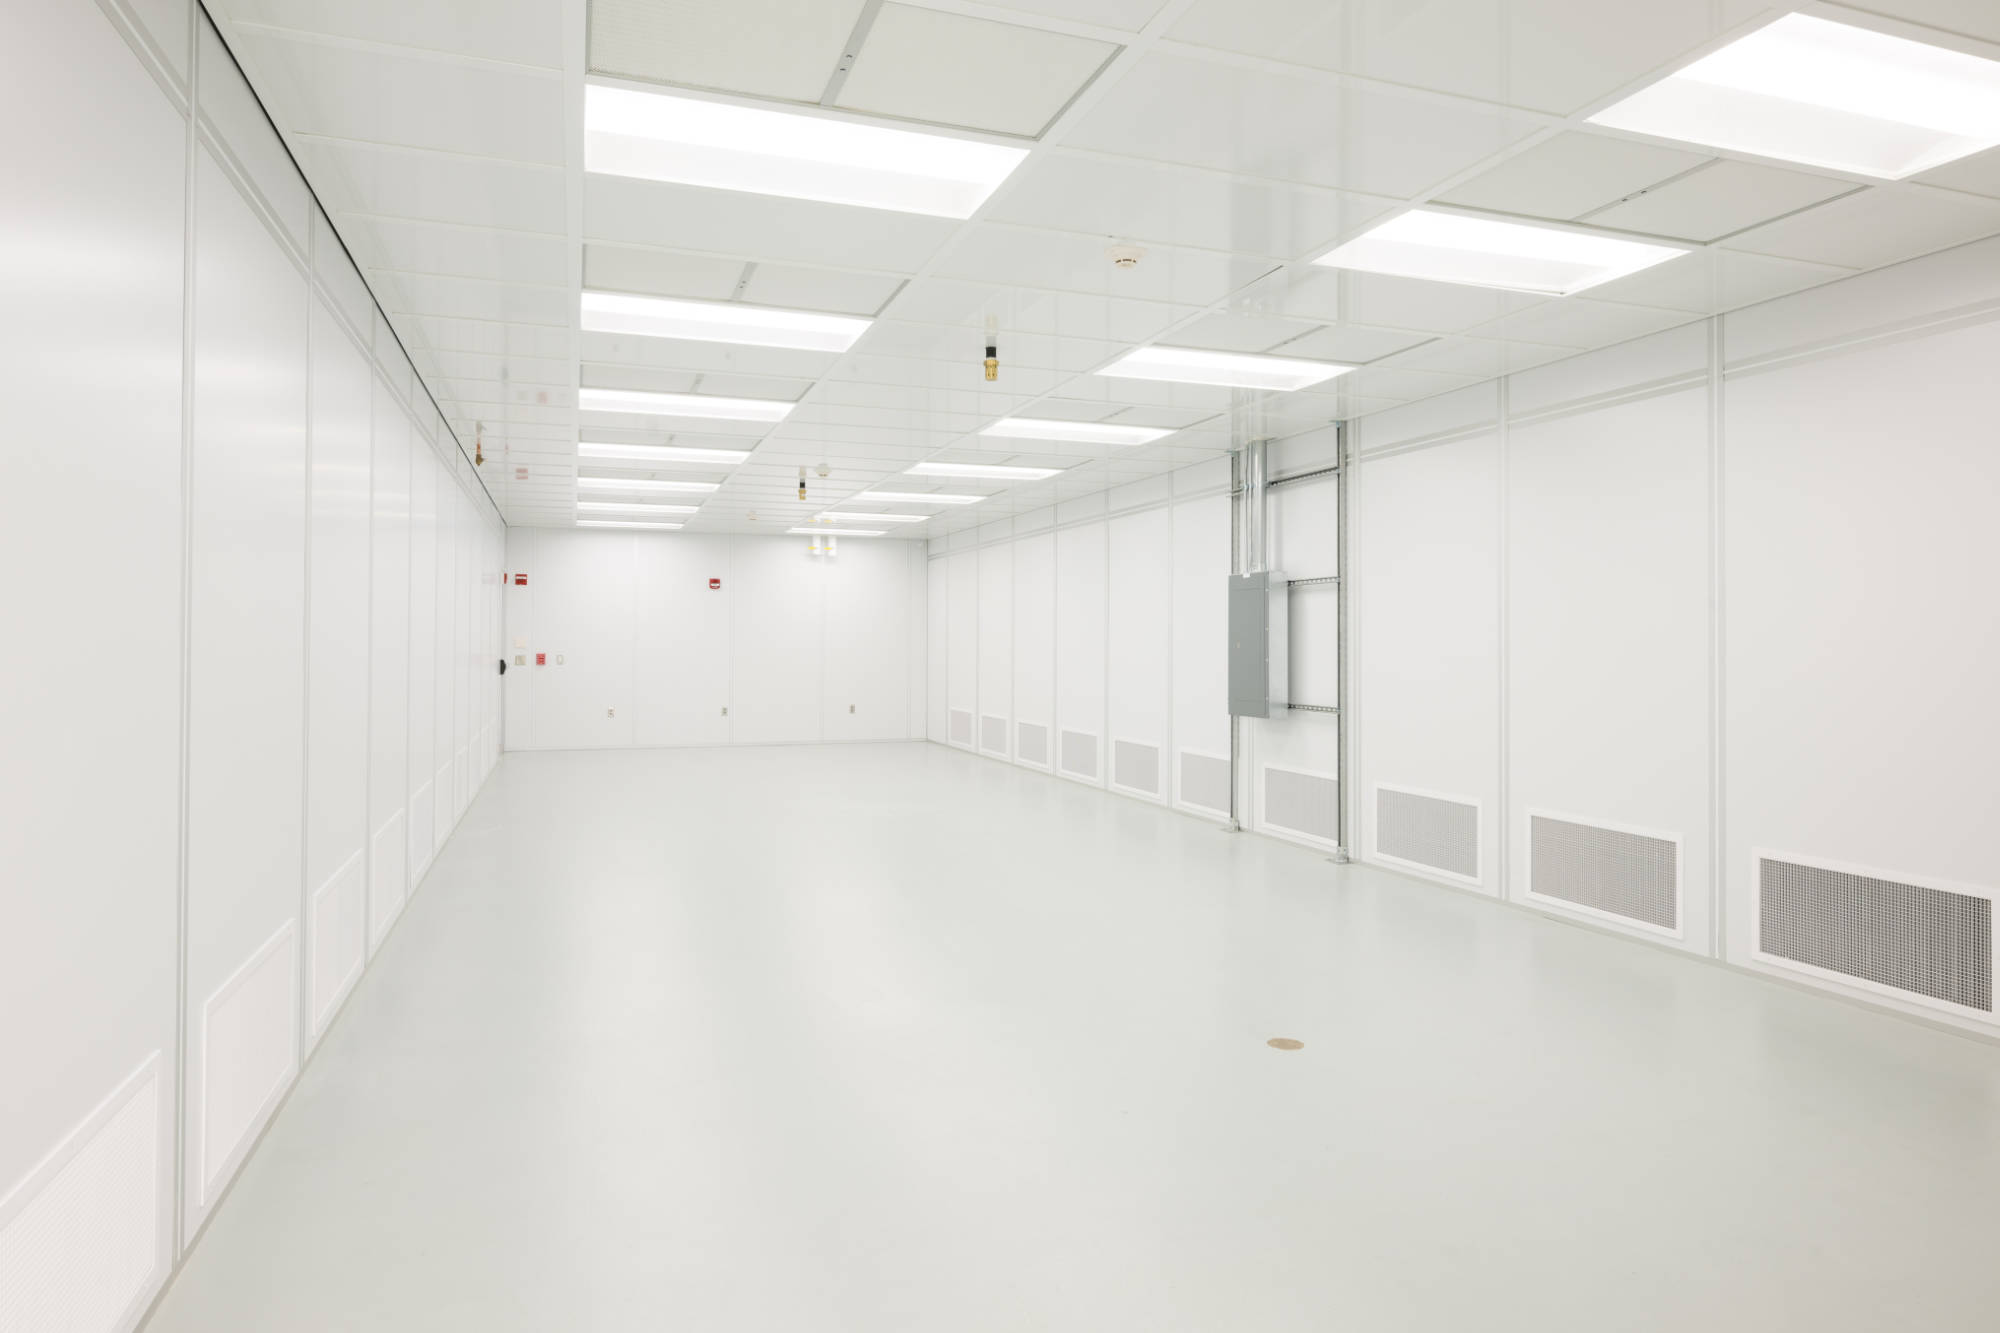 Low-vibration, class-1000 clean room at the Laboratory for Laser Energetics building expansion.